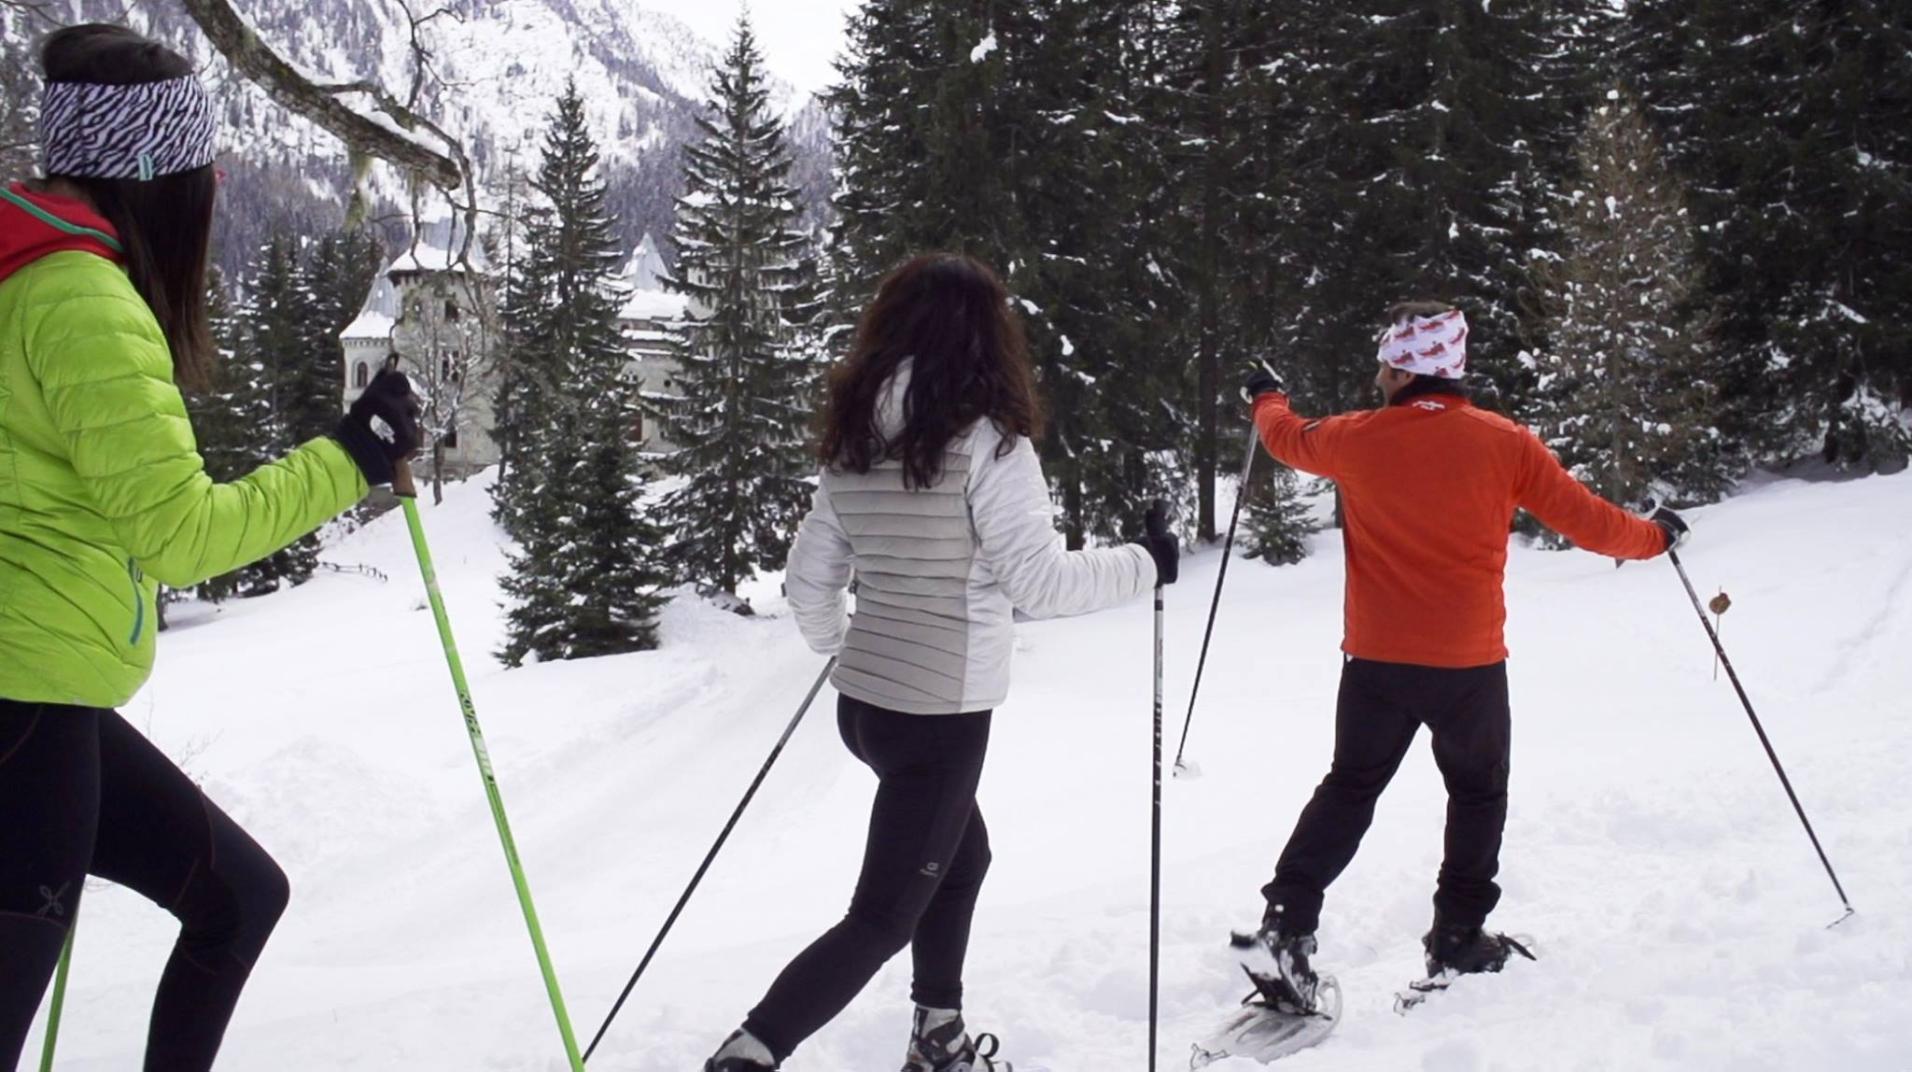 DINING AND SNOWSHOEING WITH THE CROSS-COUNTRY SKI SCHOOL